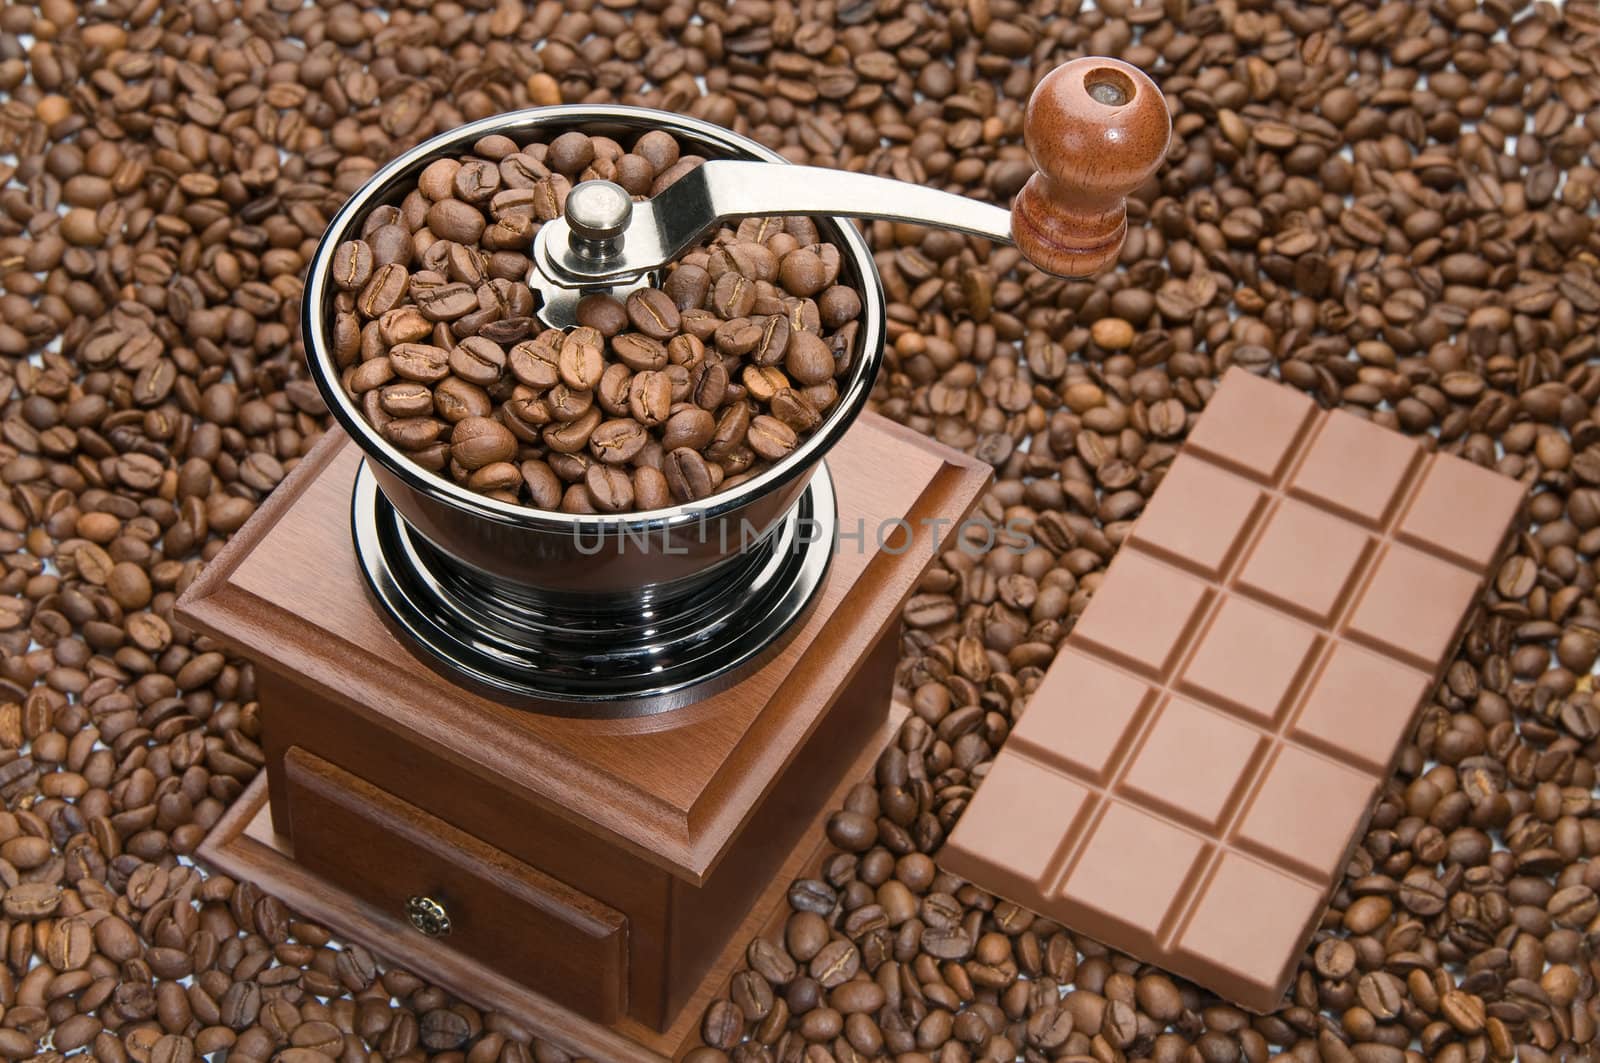 Old coffee grinder and Chocolate by zeffss